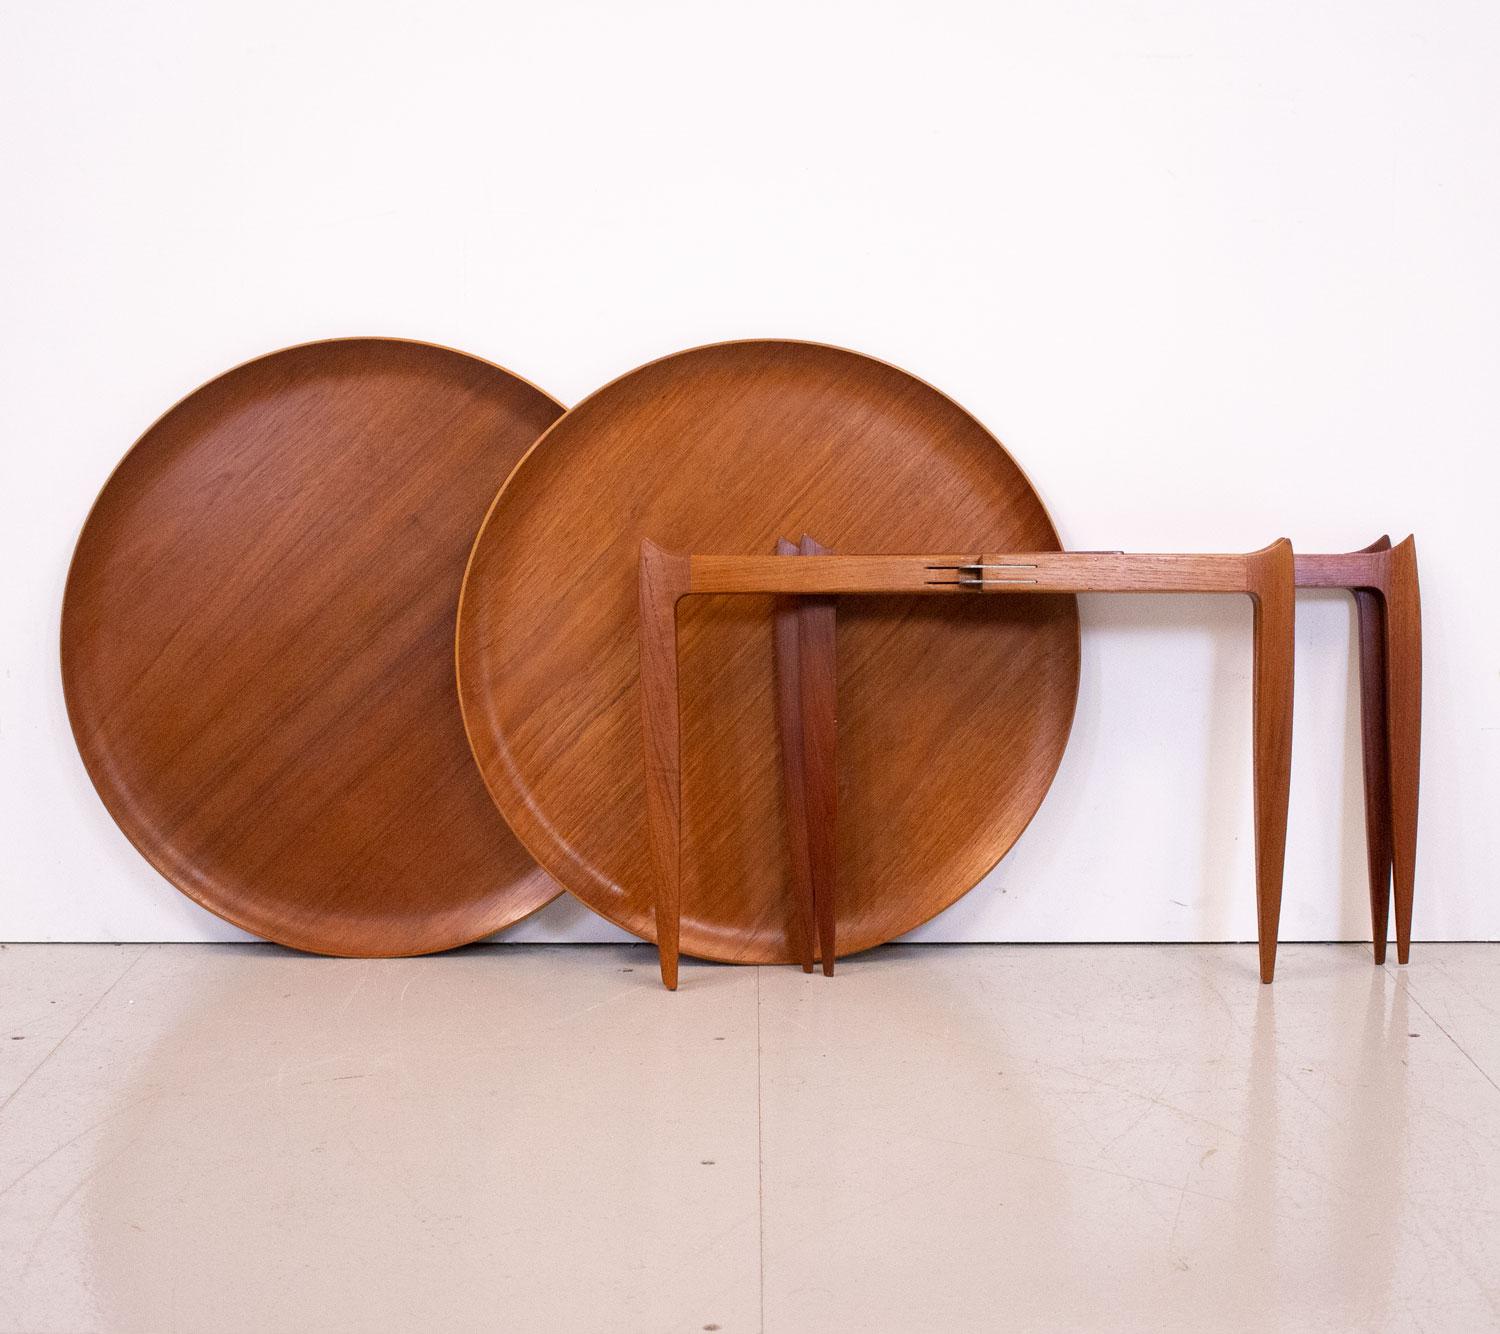 20th Century Pair of Danish Teak Model 4508 Tray Tables by Fritz Hansen, 1950s For Sale